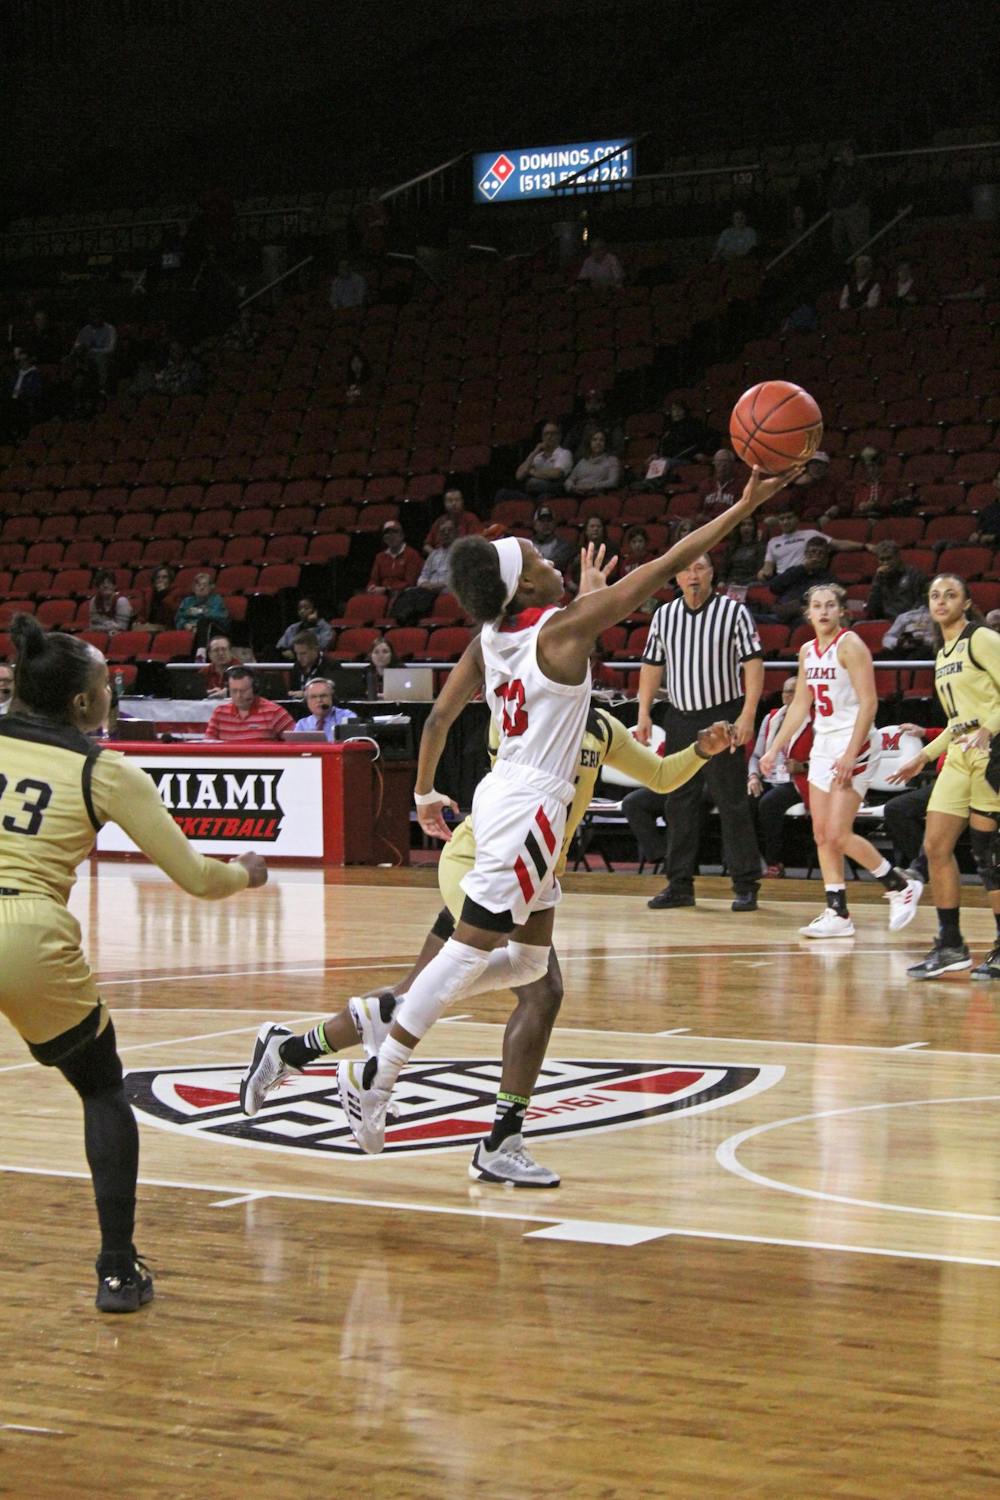 Senior guard Lauren Dickerson attempts a layup in a 70-67 Miami victory over Western Michigan Feb. 3 at Millett Hall.